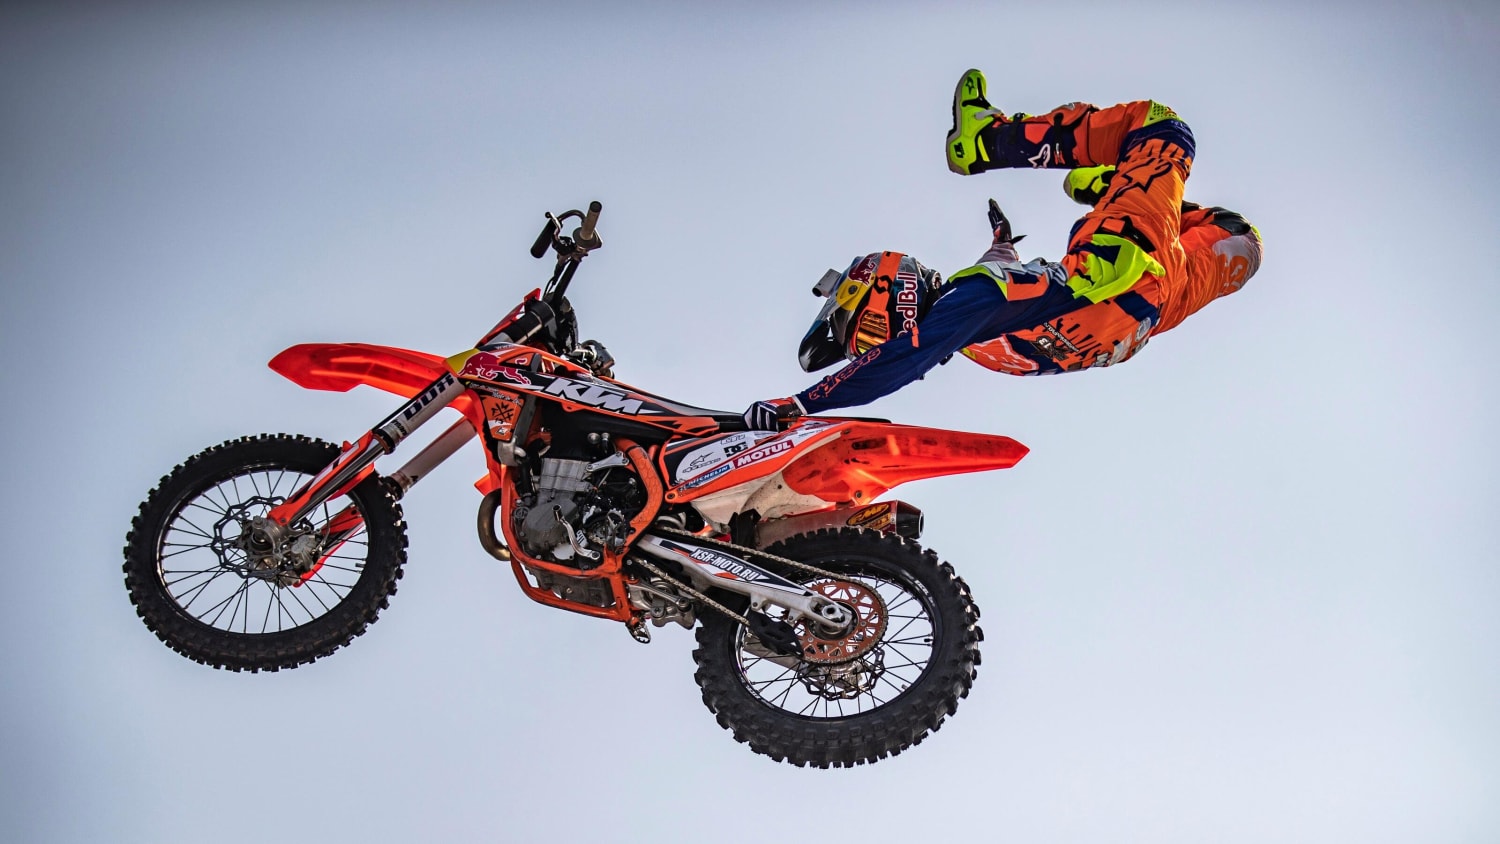 How to become an FMX rider: 10 essential tips